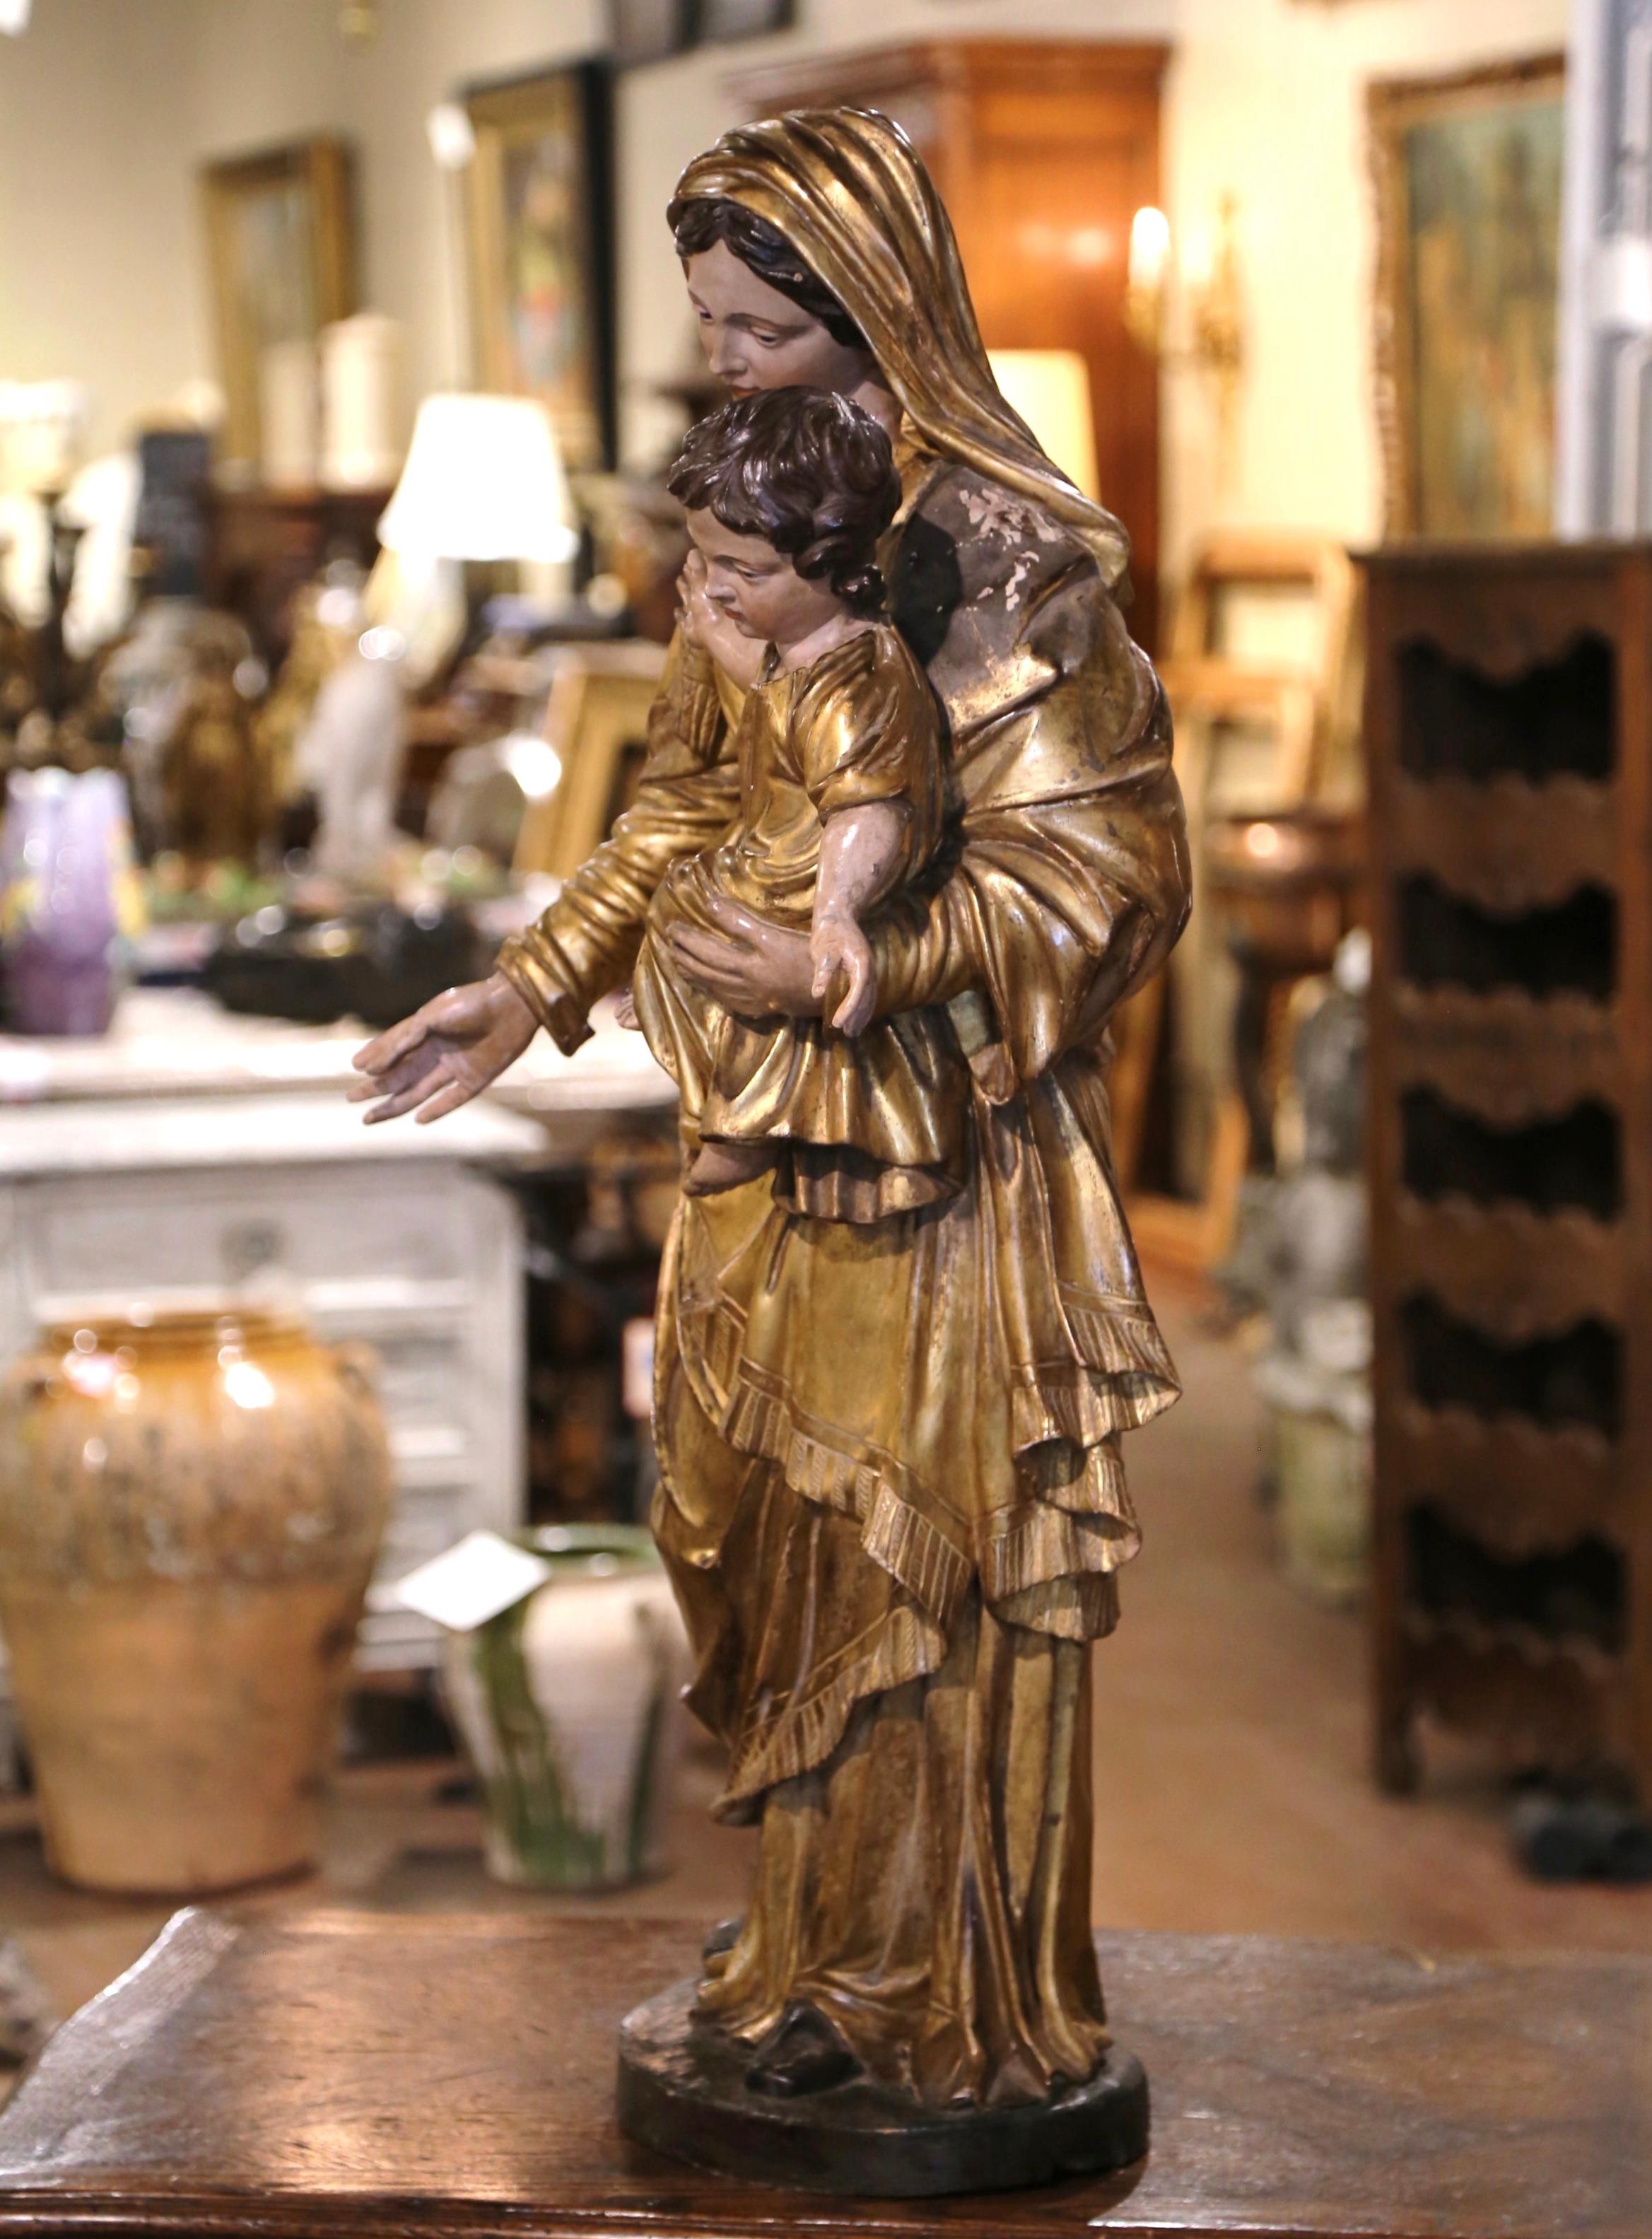 Hand carved circa 1780, this important antique statue of the Virgin Mary and her Son was found in a chapel in Southern France. The large alluring polychrome and gilt sculpture in high relief, features Madonna carrying our Lord Jesus Christ with His